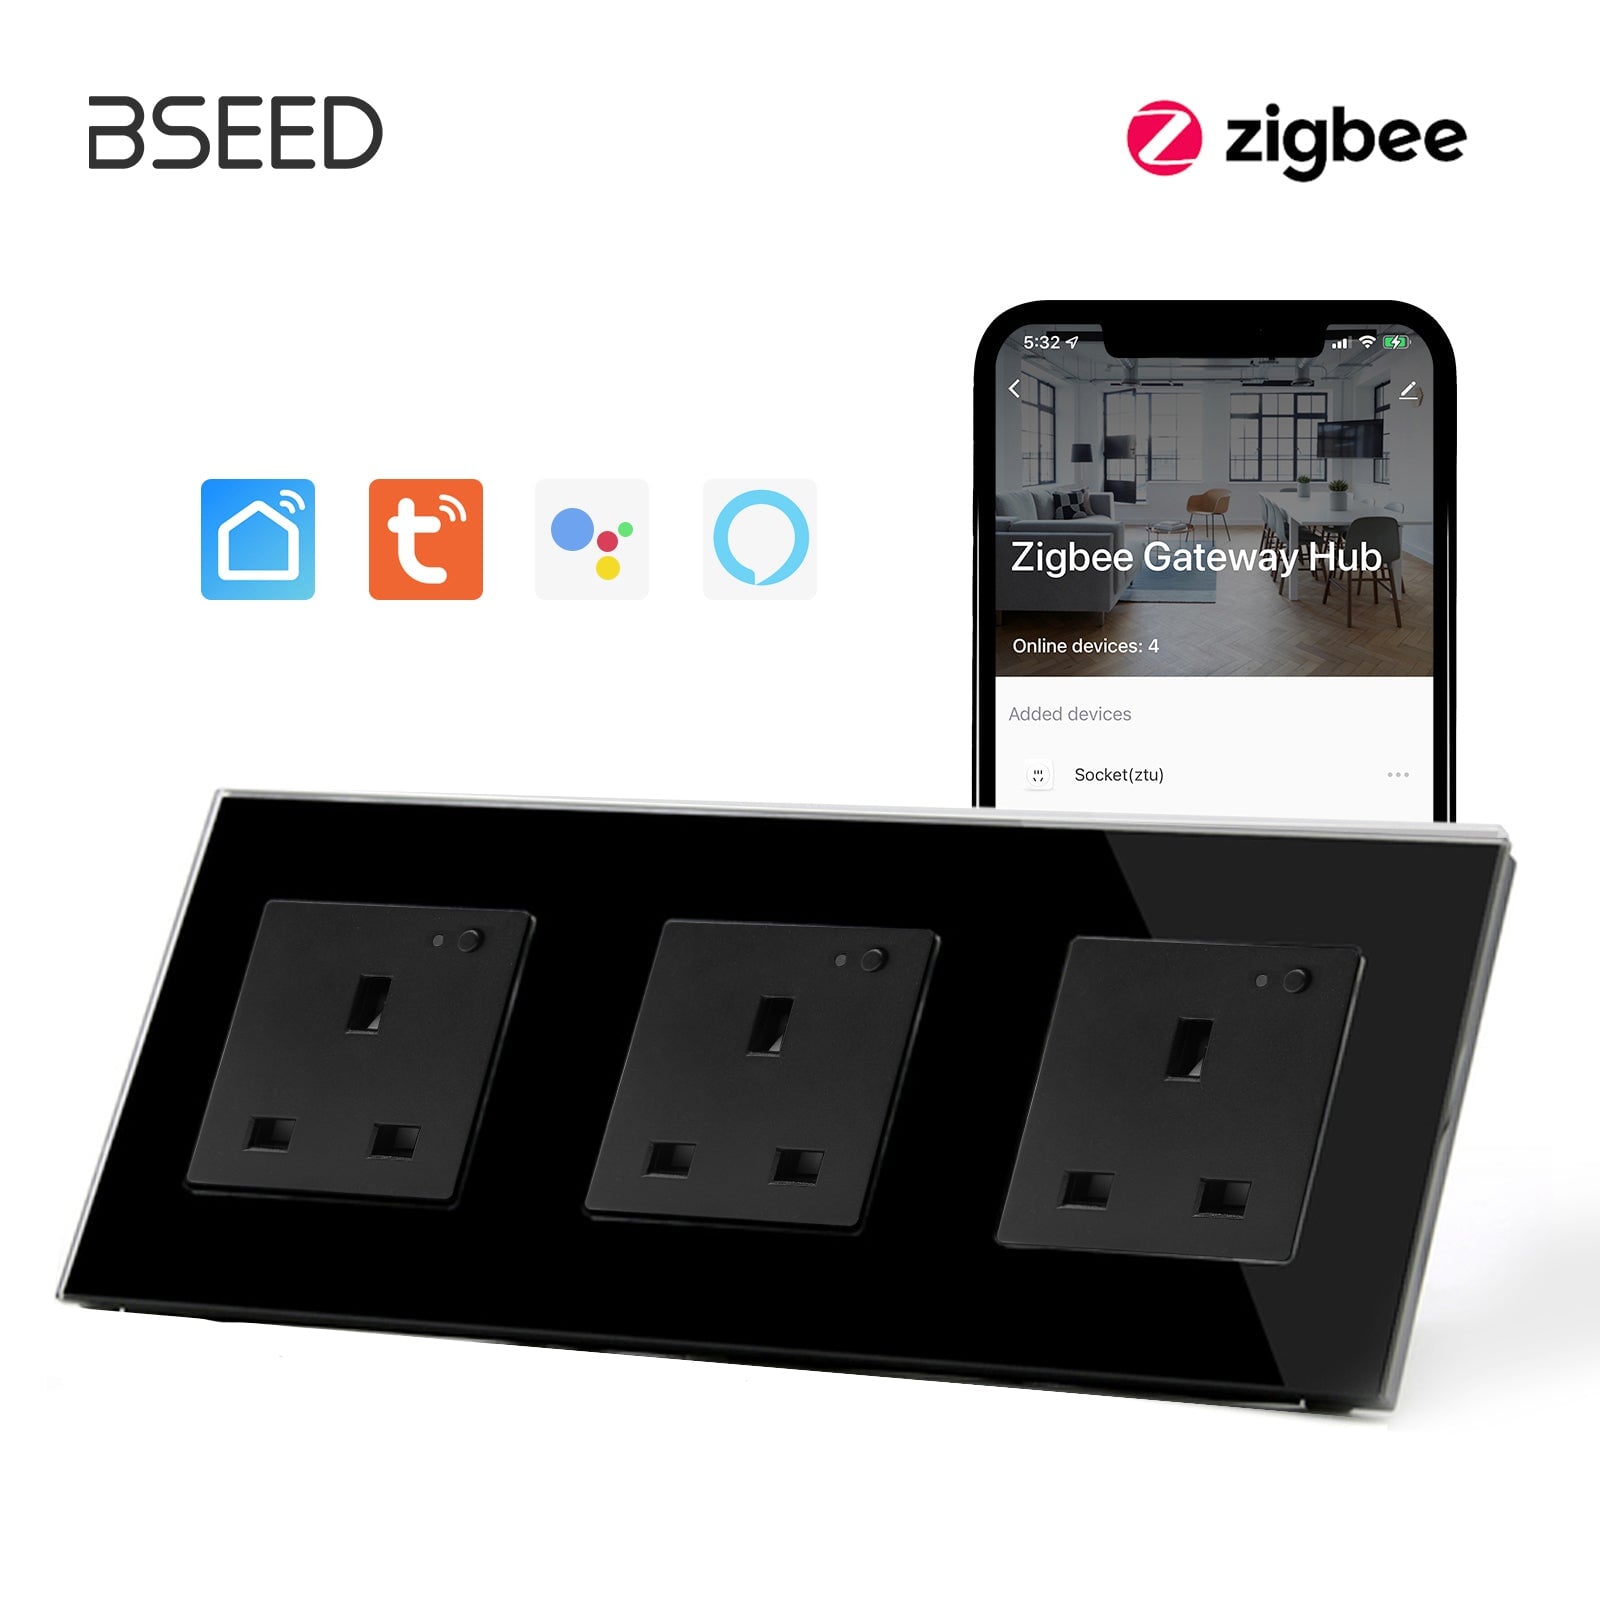 BSEED ZigBee UK Wall Sockets Power Outlets Kids Protection Wall Plates & Covers Bseedswitch black Triple 